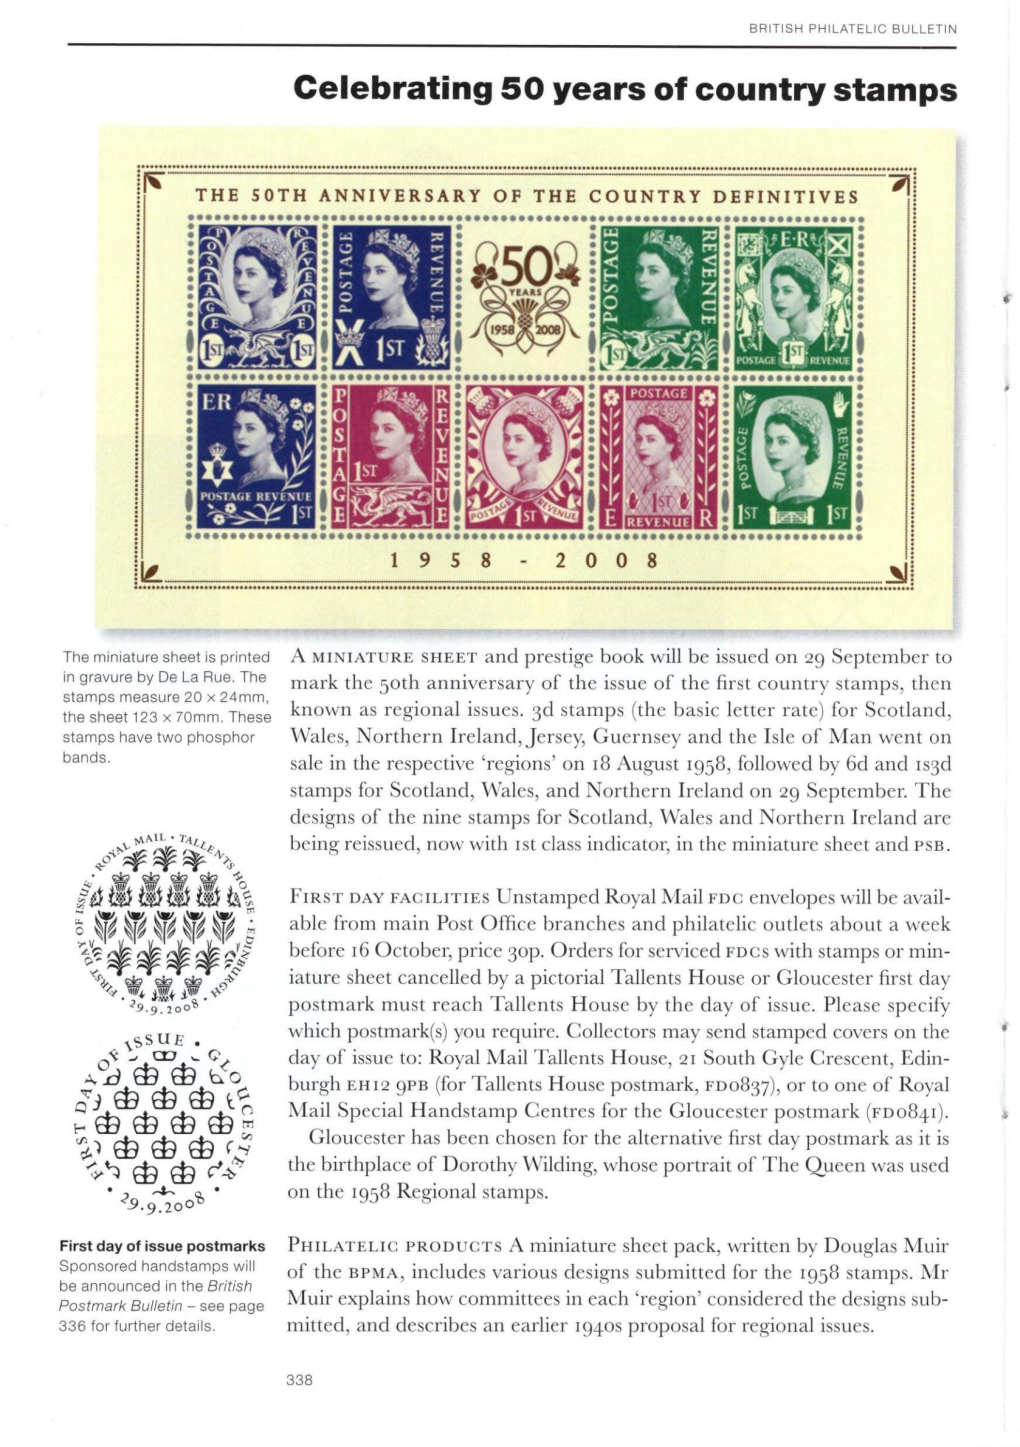 Pb4511 50Th Anniversary of the Country Definitives